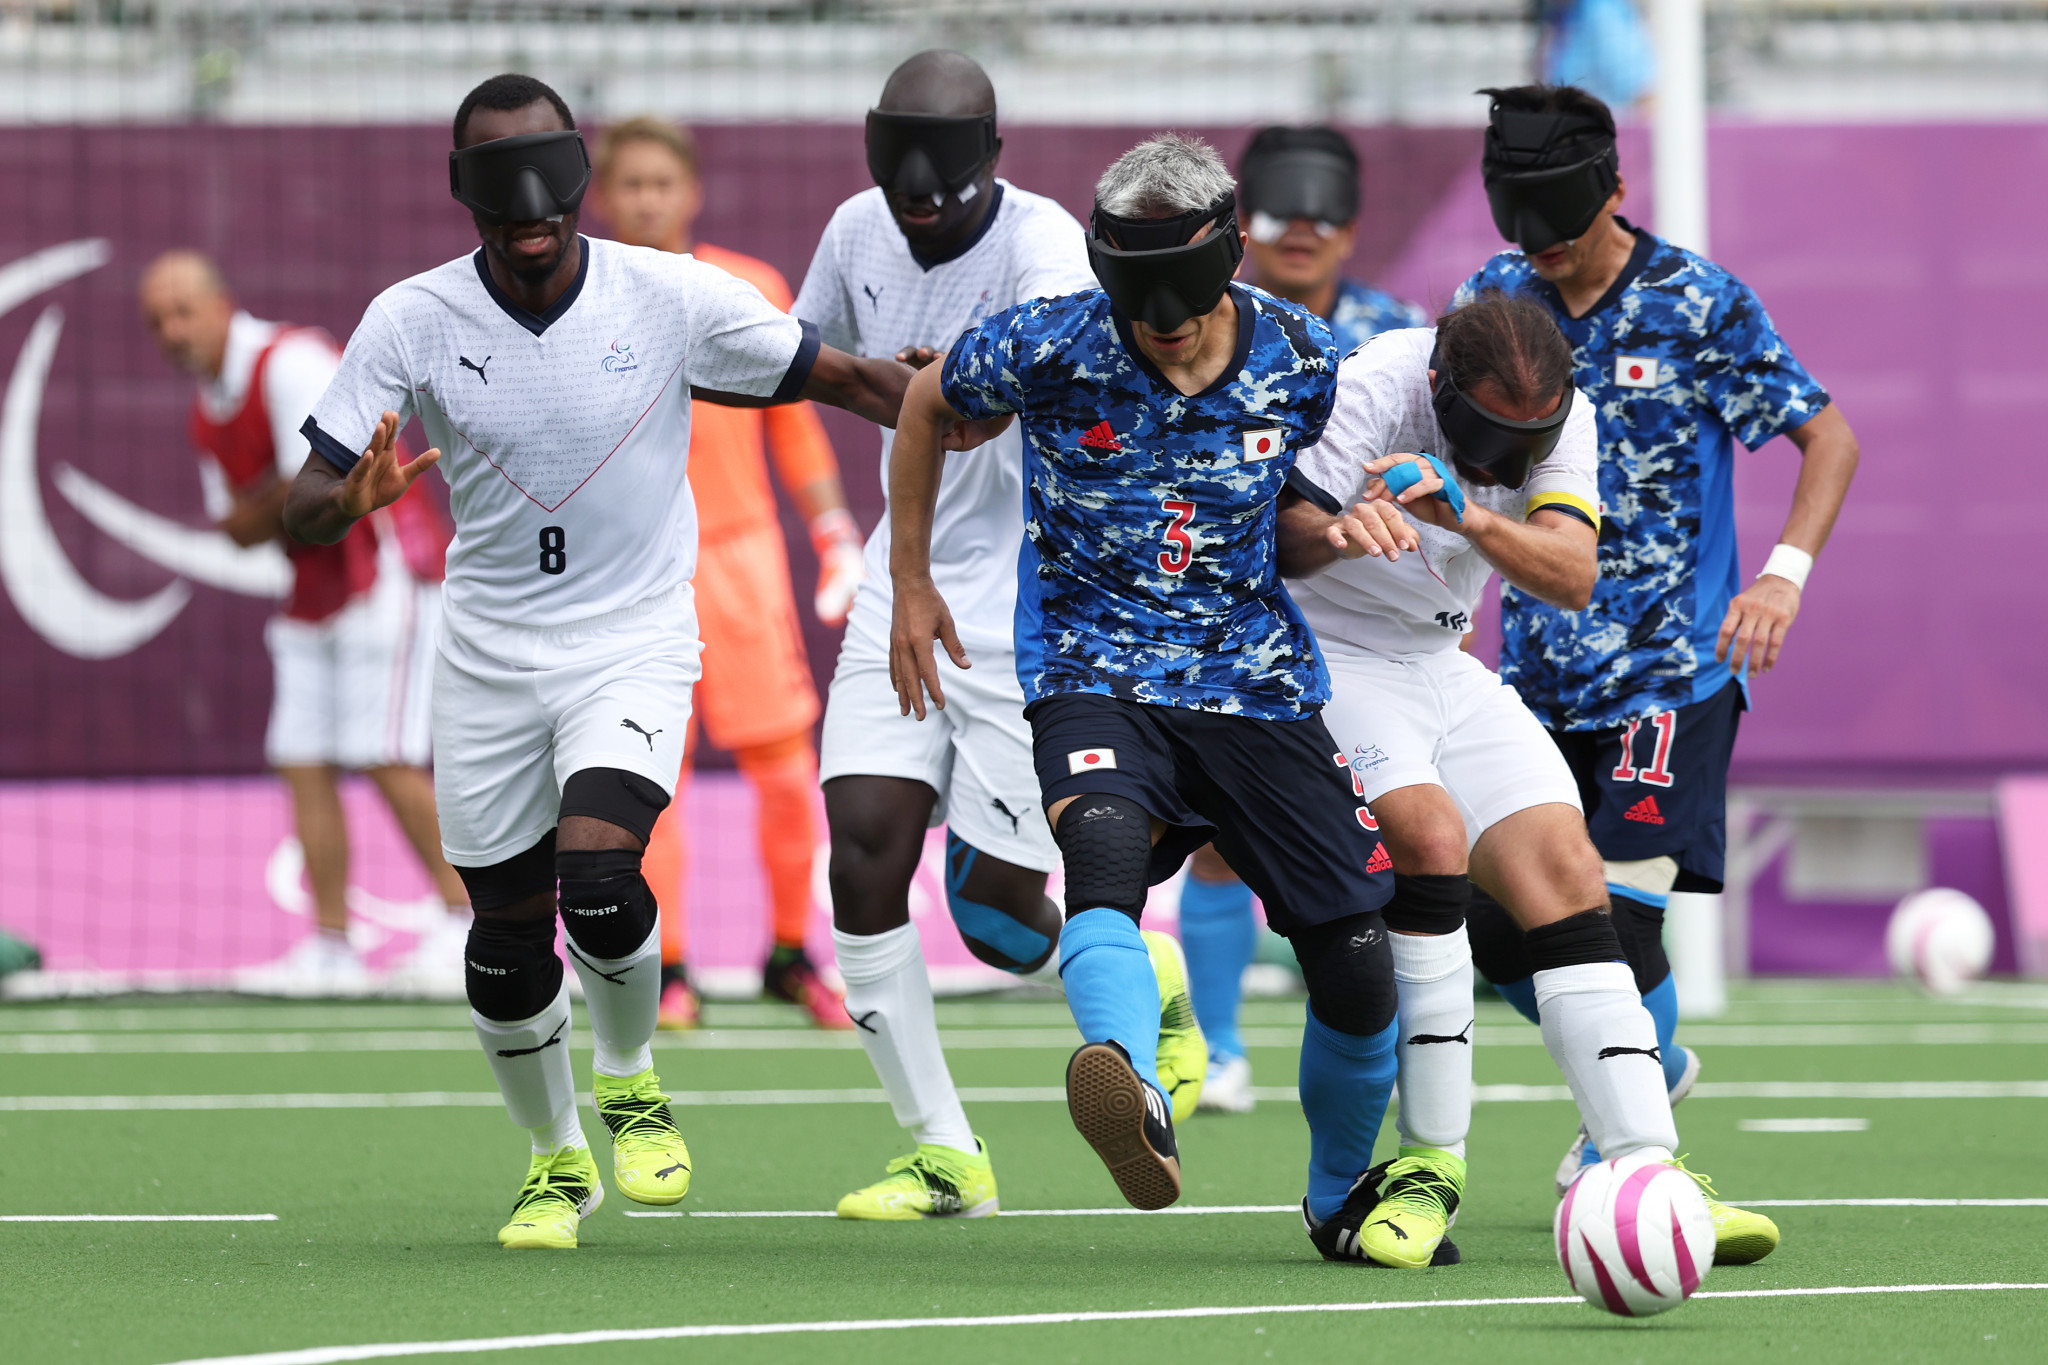 The Blind Football World Grand Prix is Mexico is to offer a place at the World Championship ©Getty Images